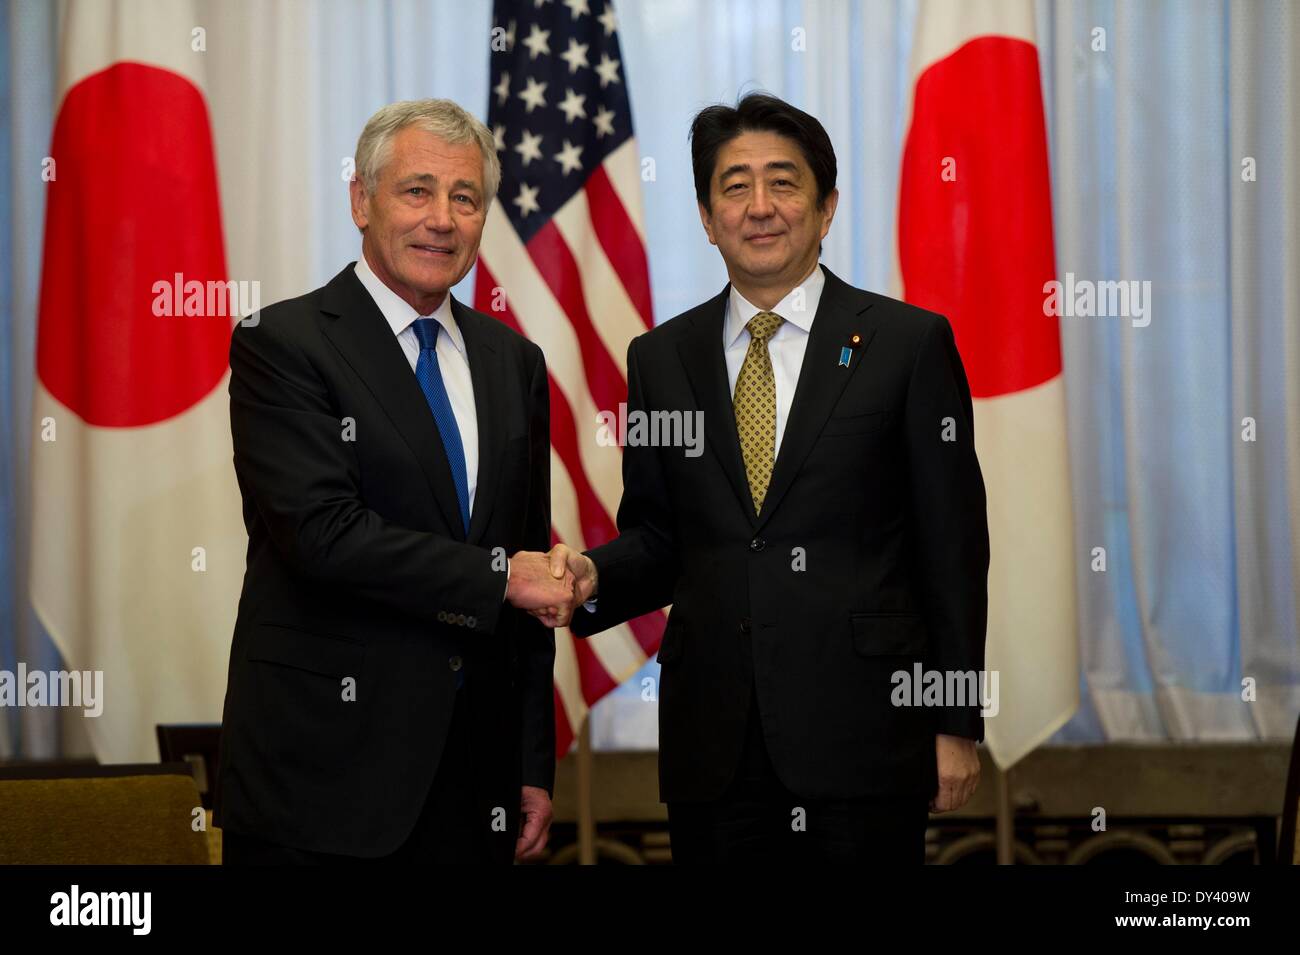 US Secretary of Defense Chuck Hagel greets Japanese Prime Minister Shinzo Abe at the Prime Ministers official residence Sori Daijin Kantei April 5, 2014 in Tokyo, Japan. Hagel announced the deployment of drones and missile destroyers to bolster US-Japan defense alliance. Stock Photo